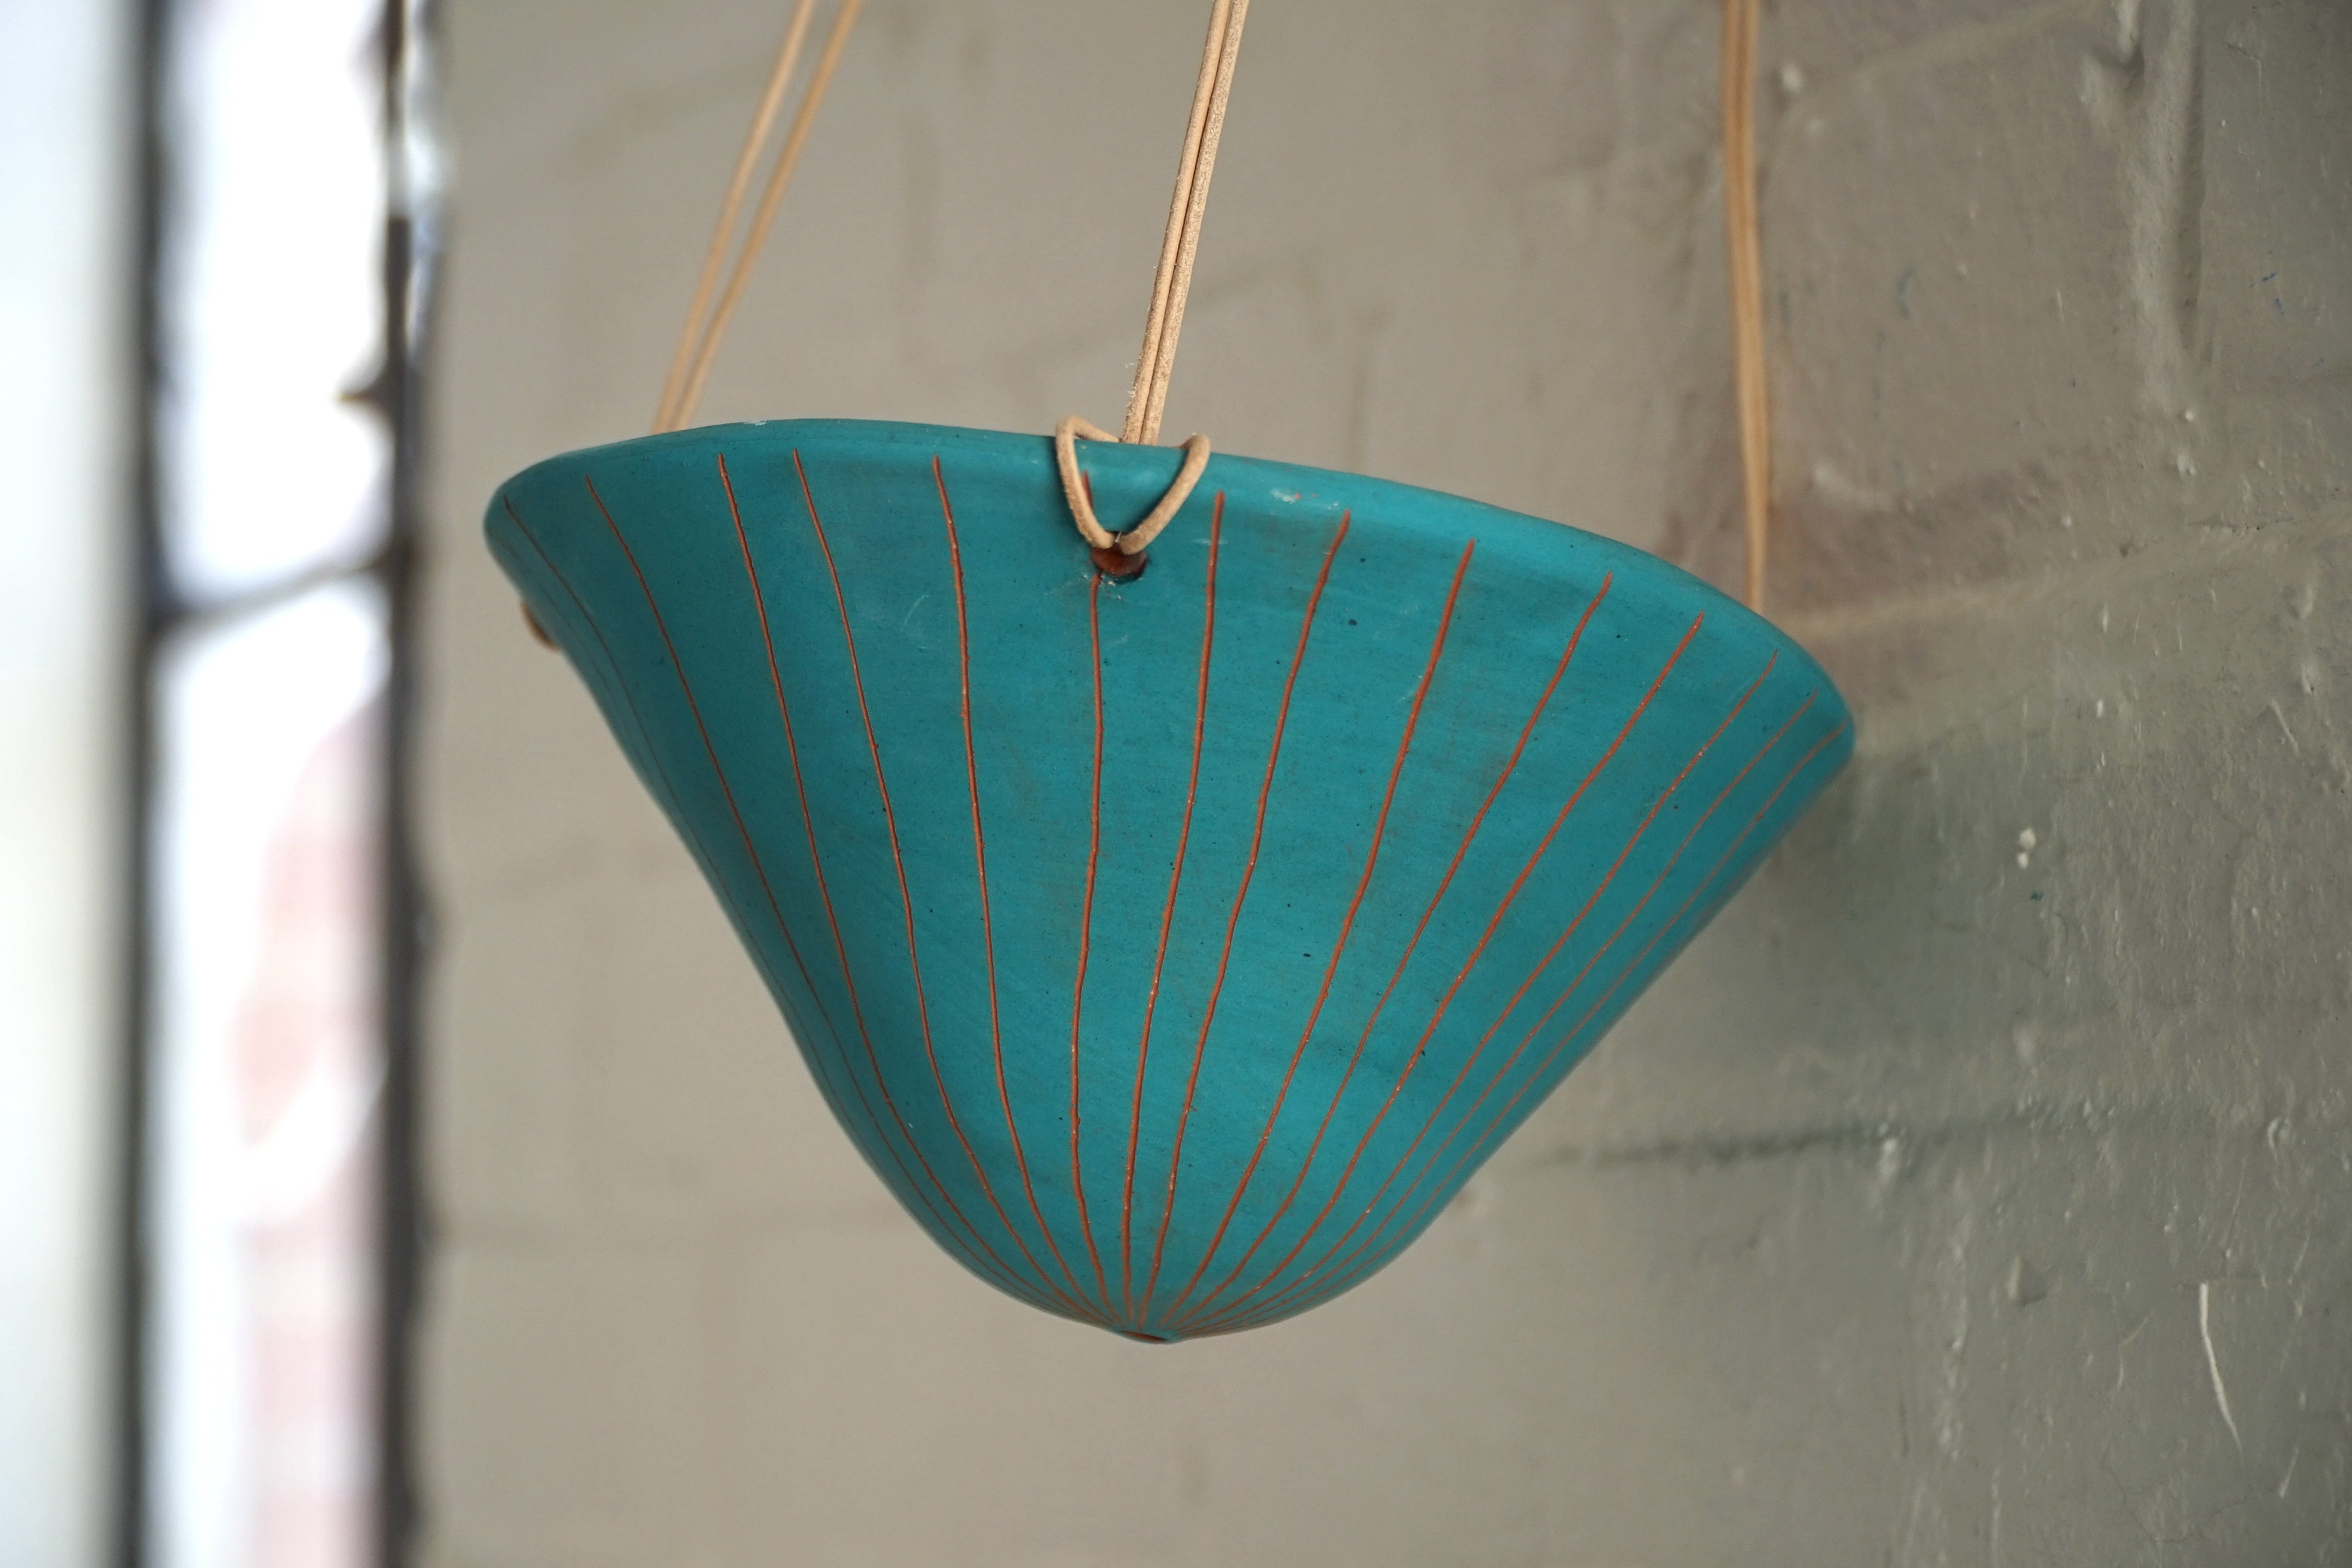 Teal & Terracotta Hanging Planter w/ "Vertical Line" Design - Hanging Pot with Carved Design - Succulent, Cactus, Herb, Air Plant, Etc